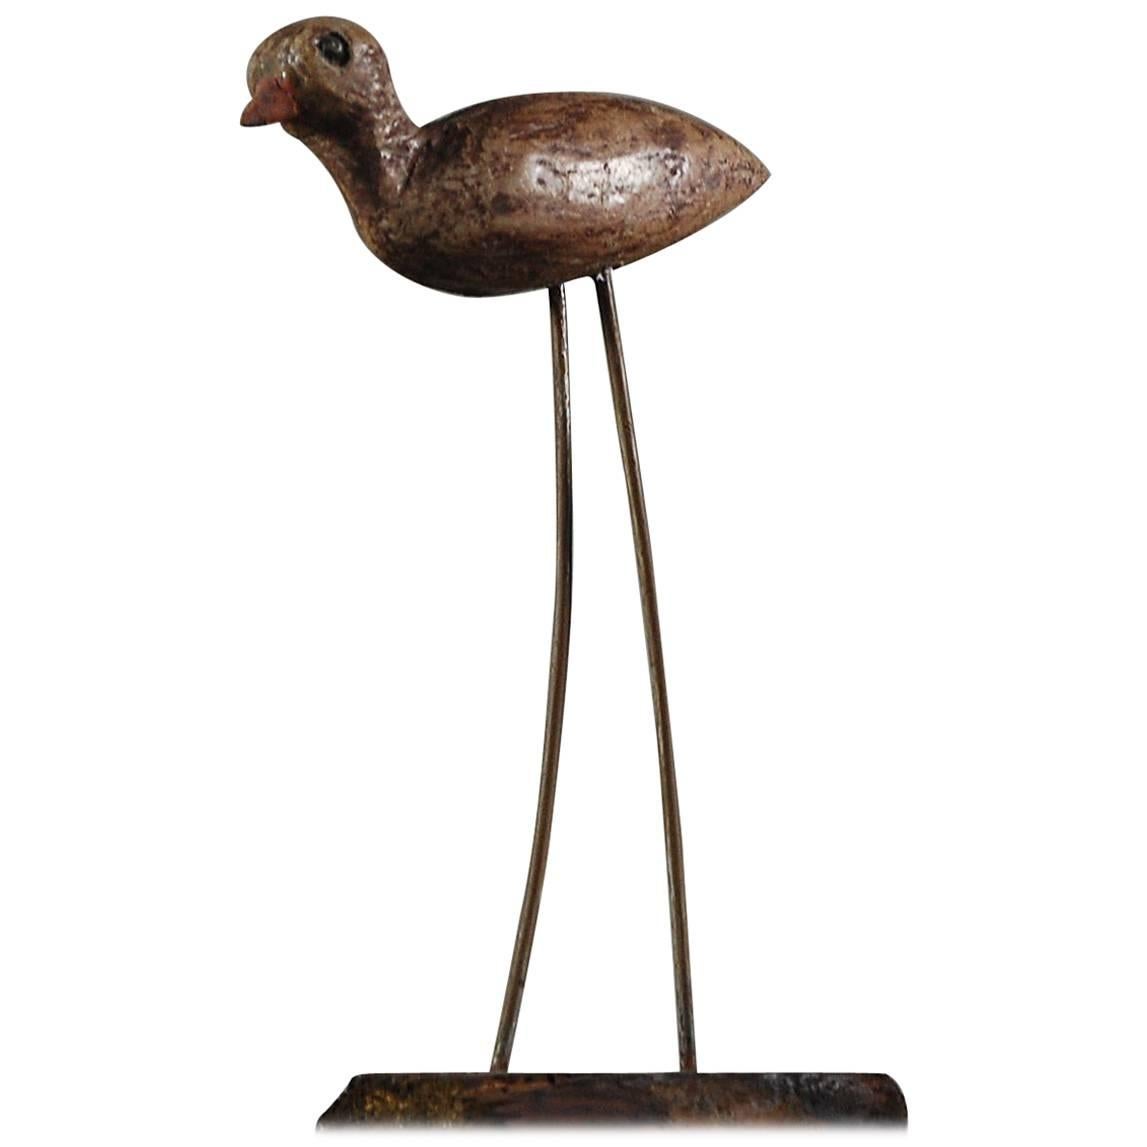 Early 20th Century French Songbird Working Decoy